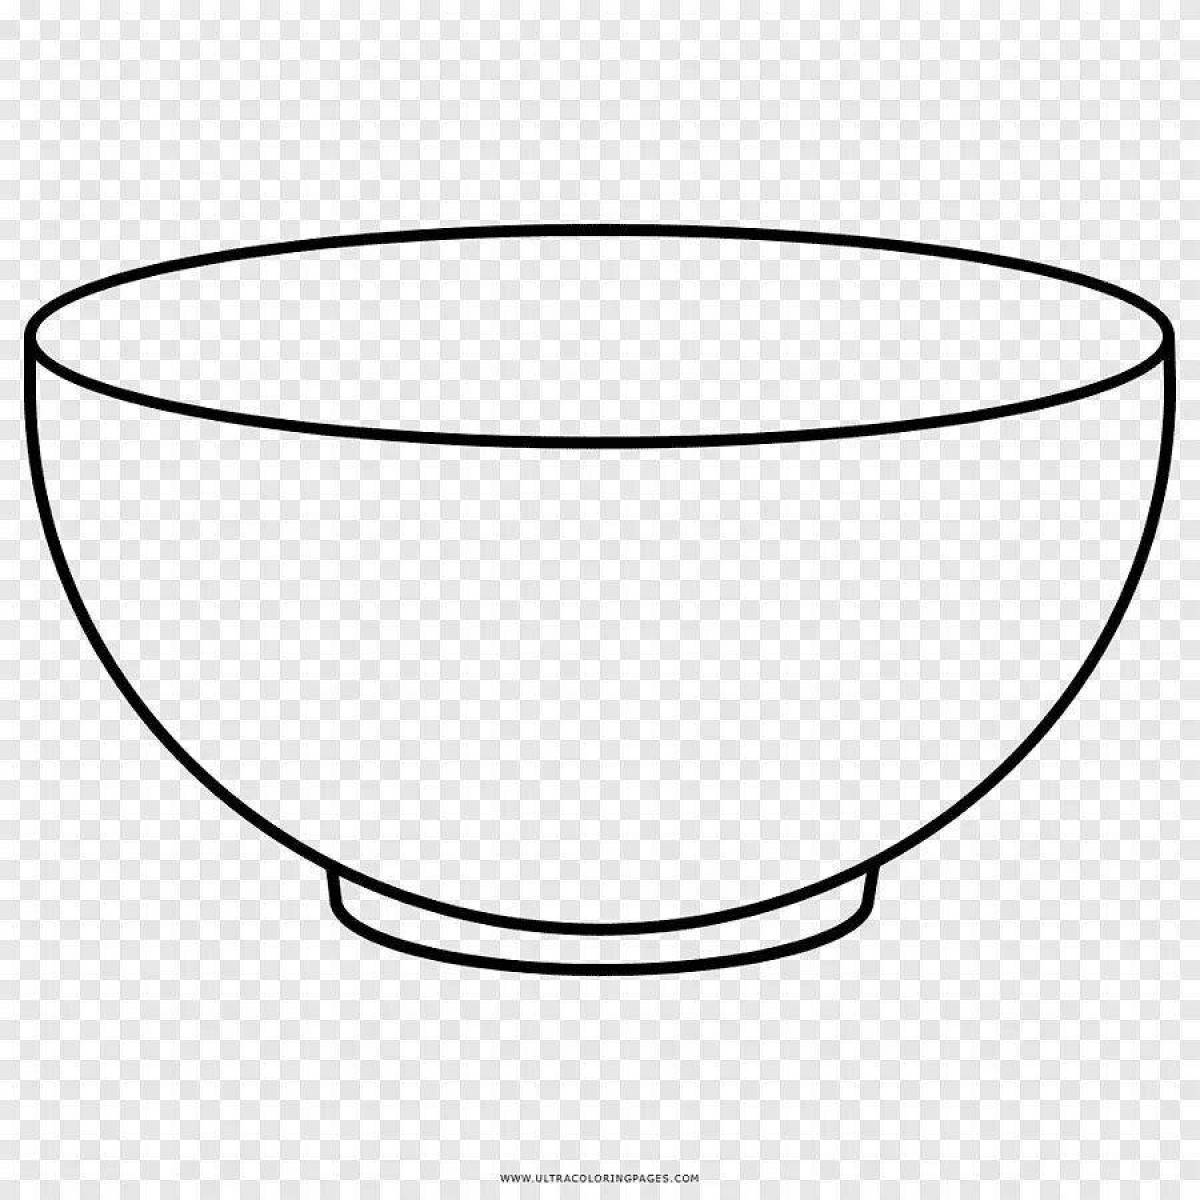 Coloring book gorgeous bowl